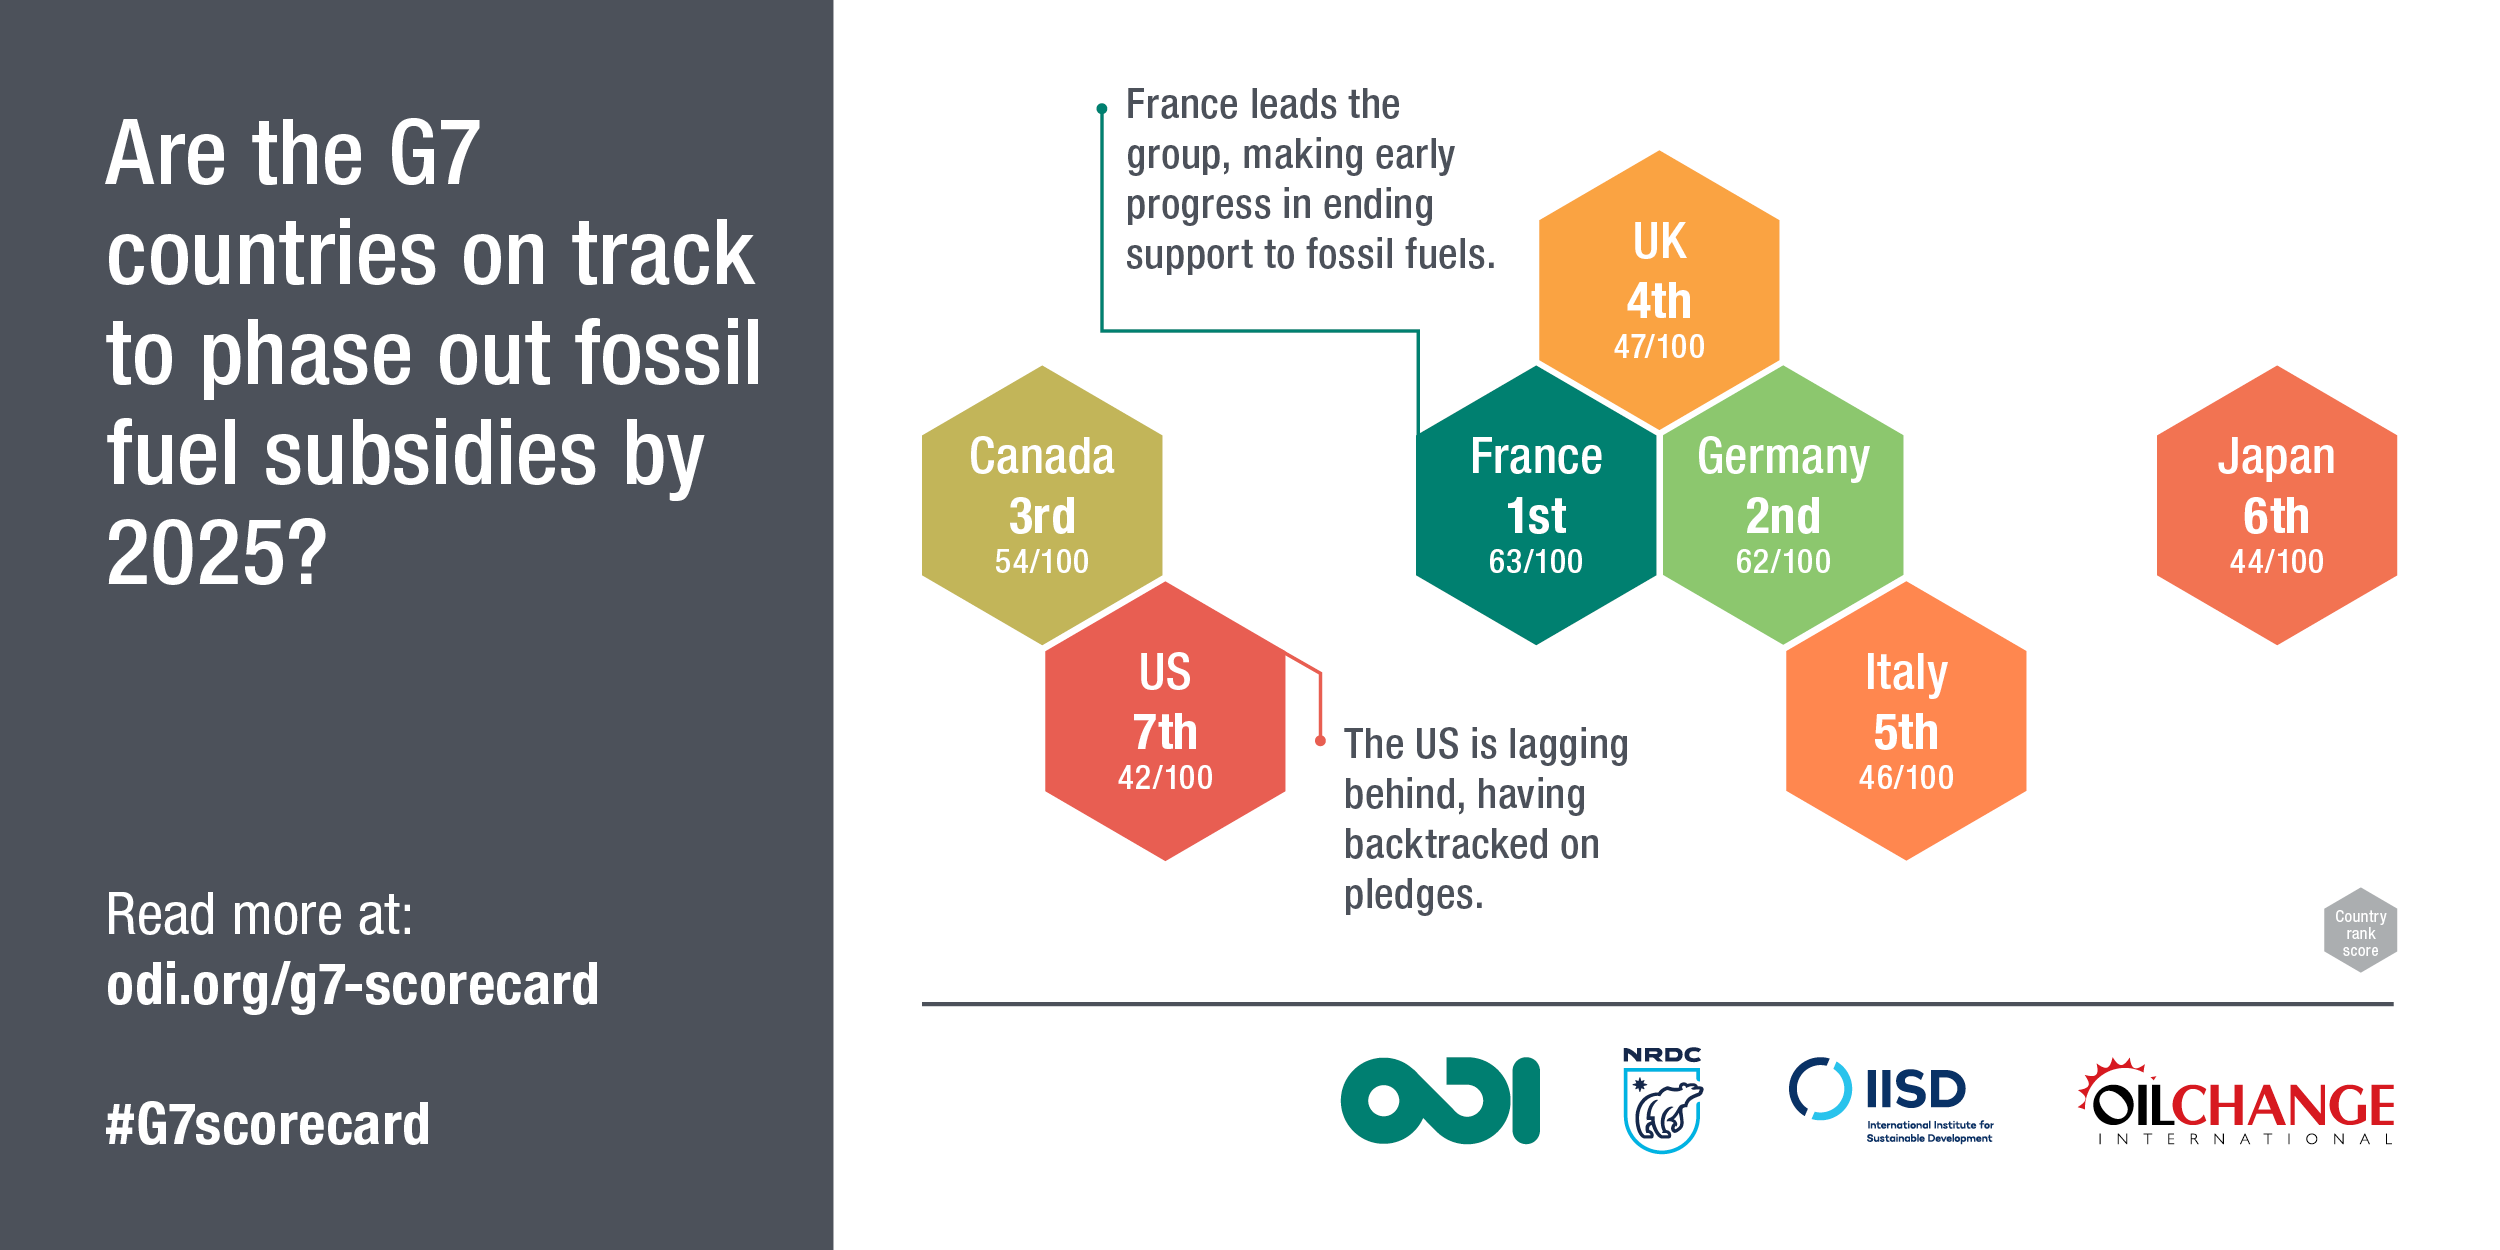 Are the G7 countries on track to phase out fossil fuel subsidies by 2025? Image: ODI